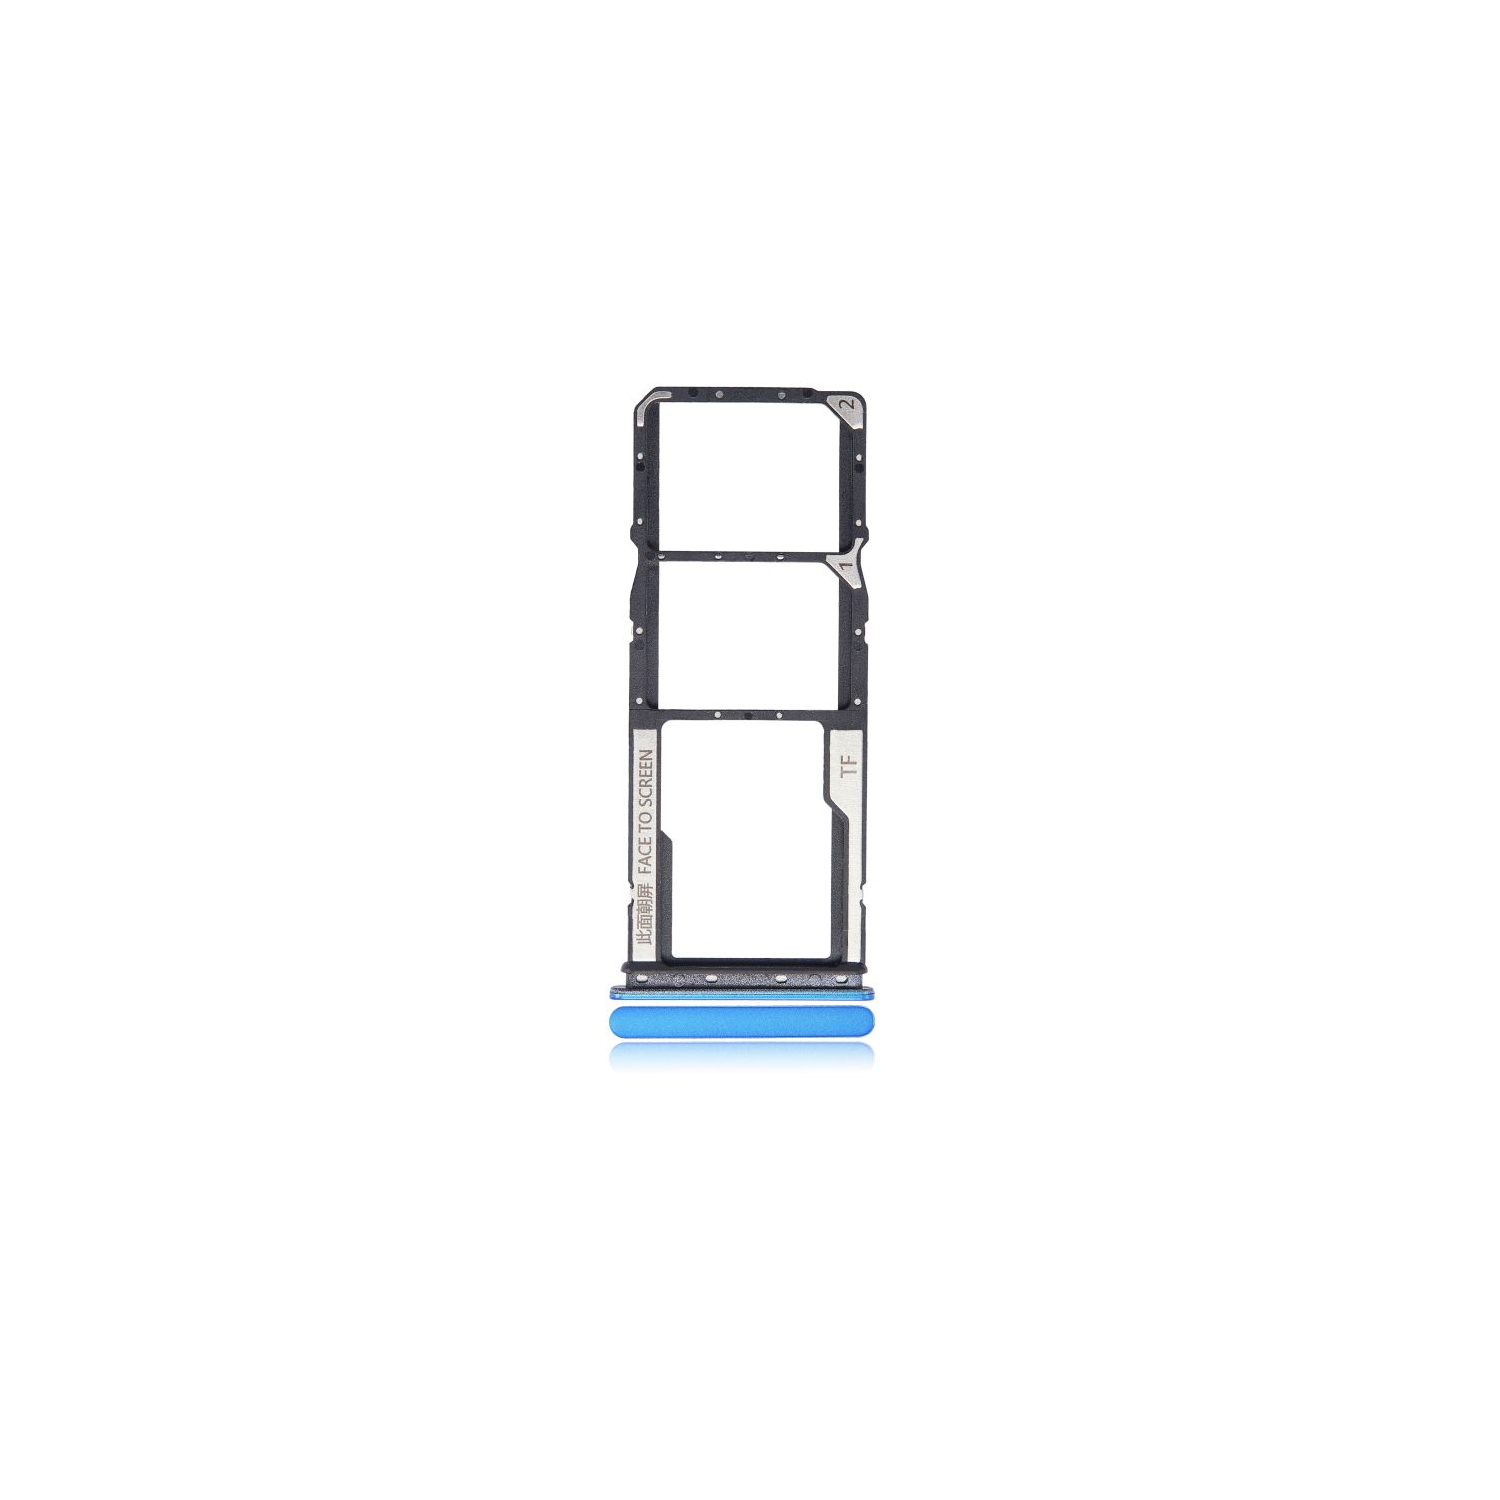 Replacement Dual Sim Card Tray Compatible For Xiaomi Redmi 9C / 9A (Blue)